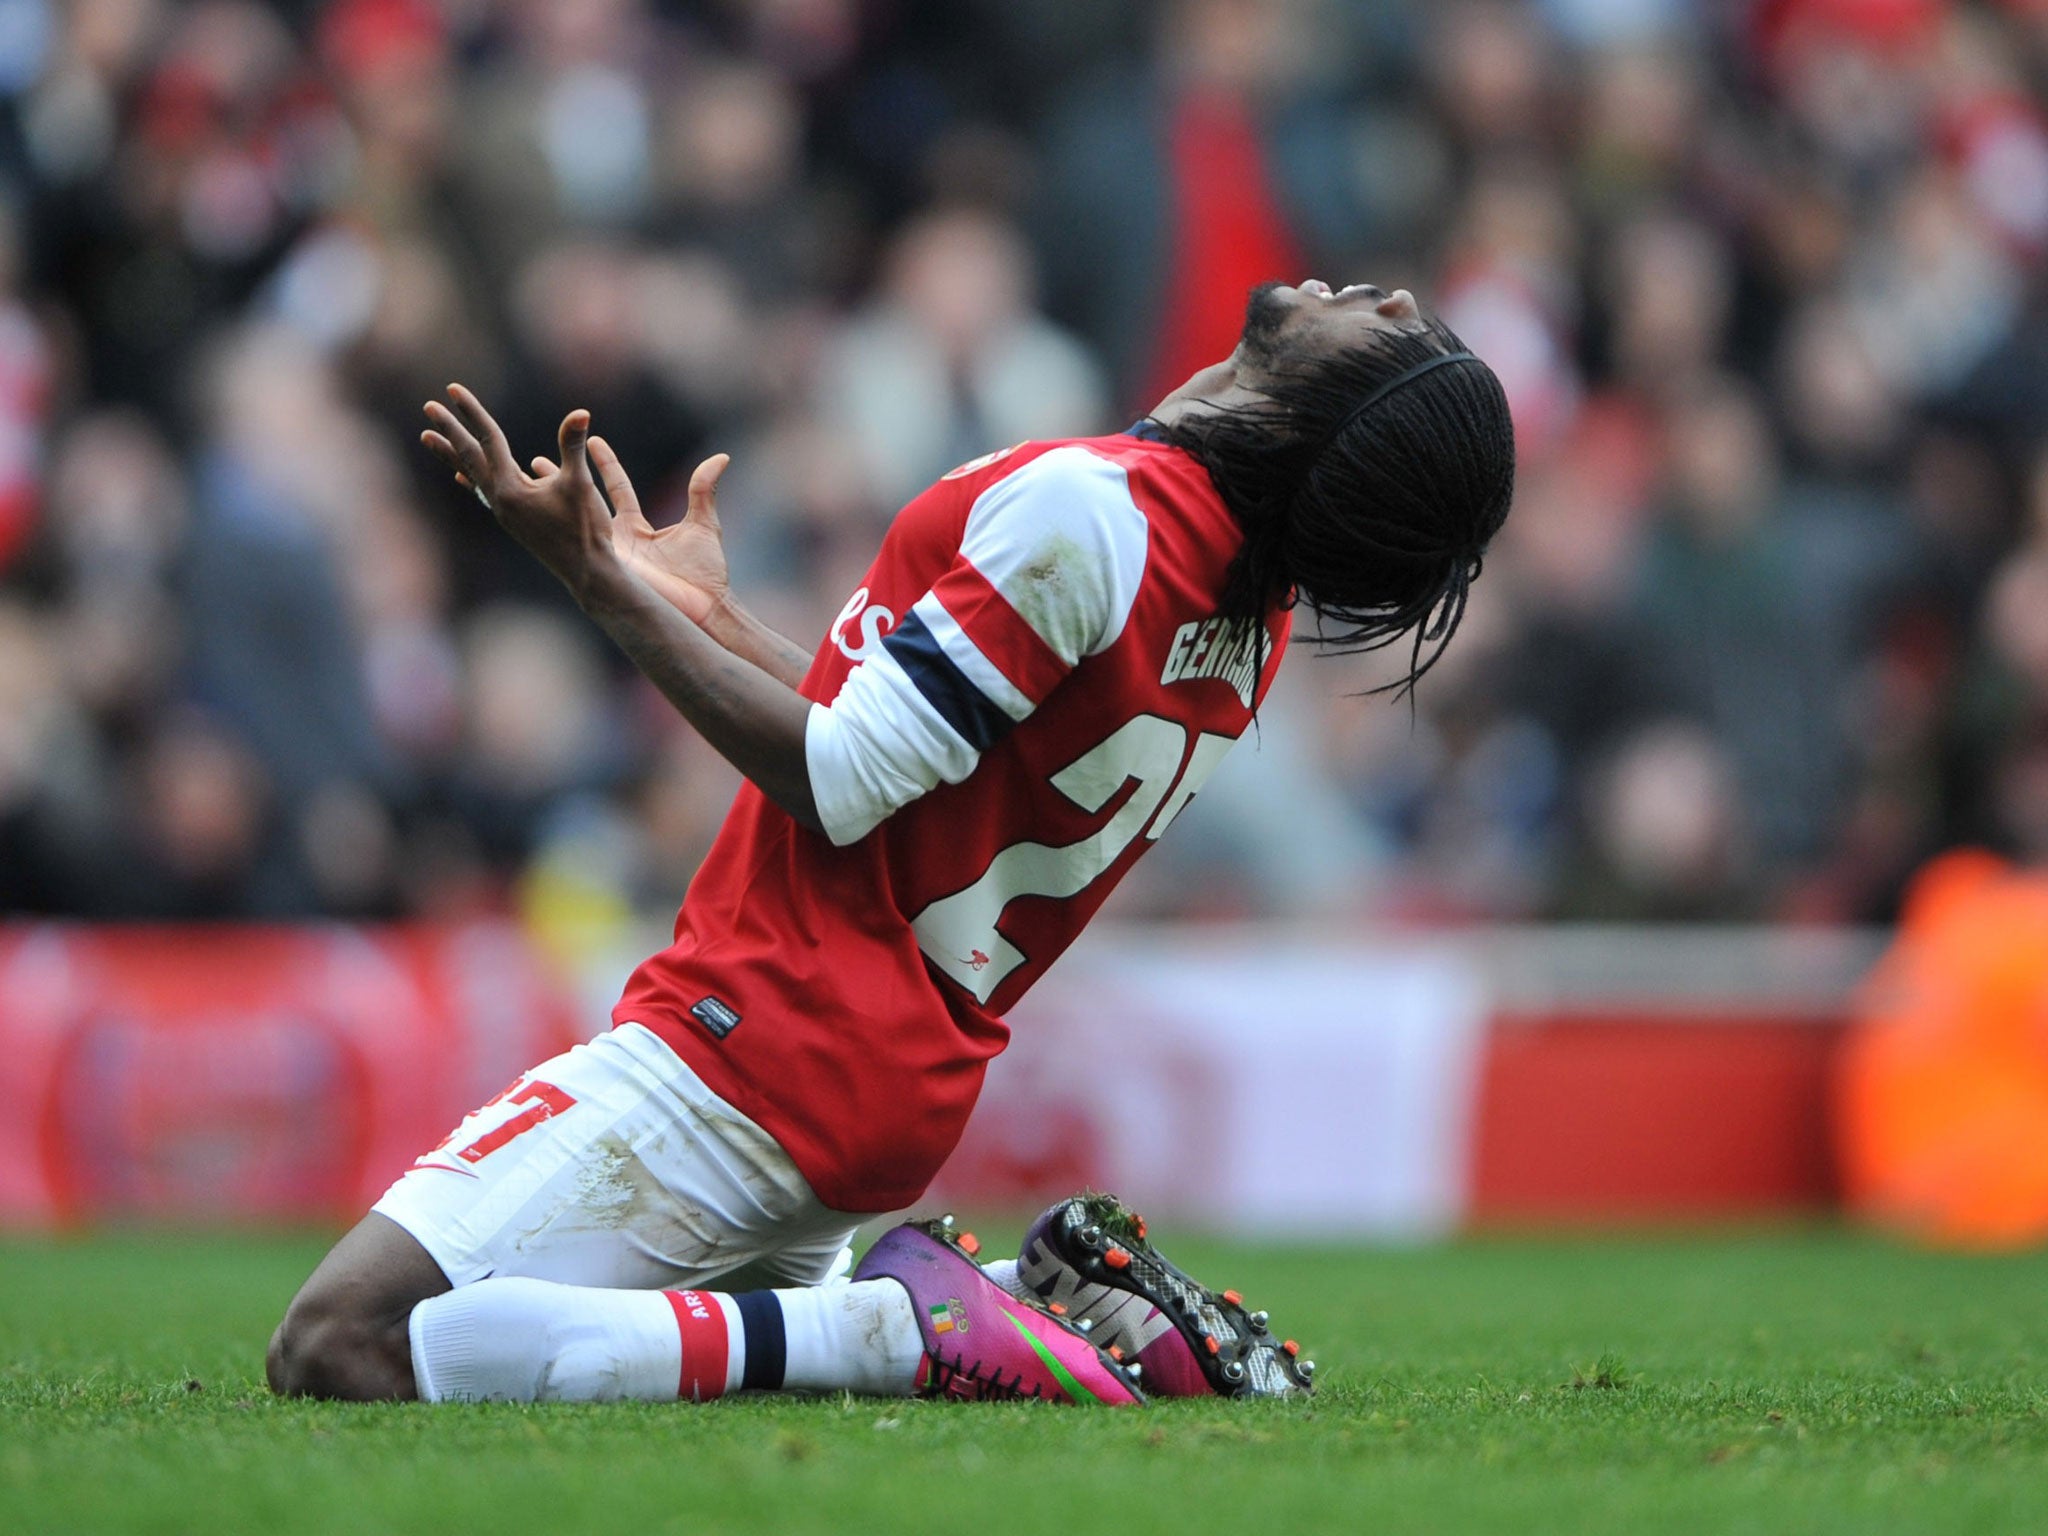 Rover and out: Gervinho shows his frustration after missing a glorious chance for Arsenal during their surprise 1-0 FA Cup fifth-round defeat against Blackburn Rovers at Emirates Stadium yesterday